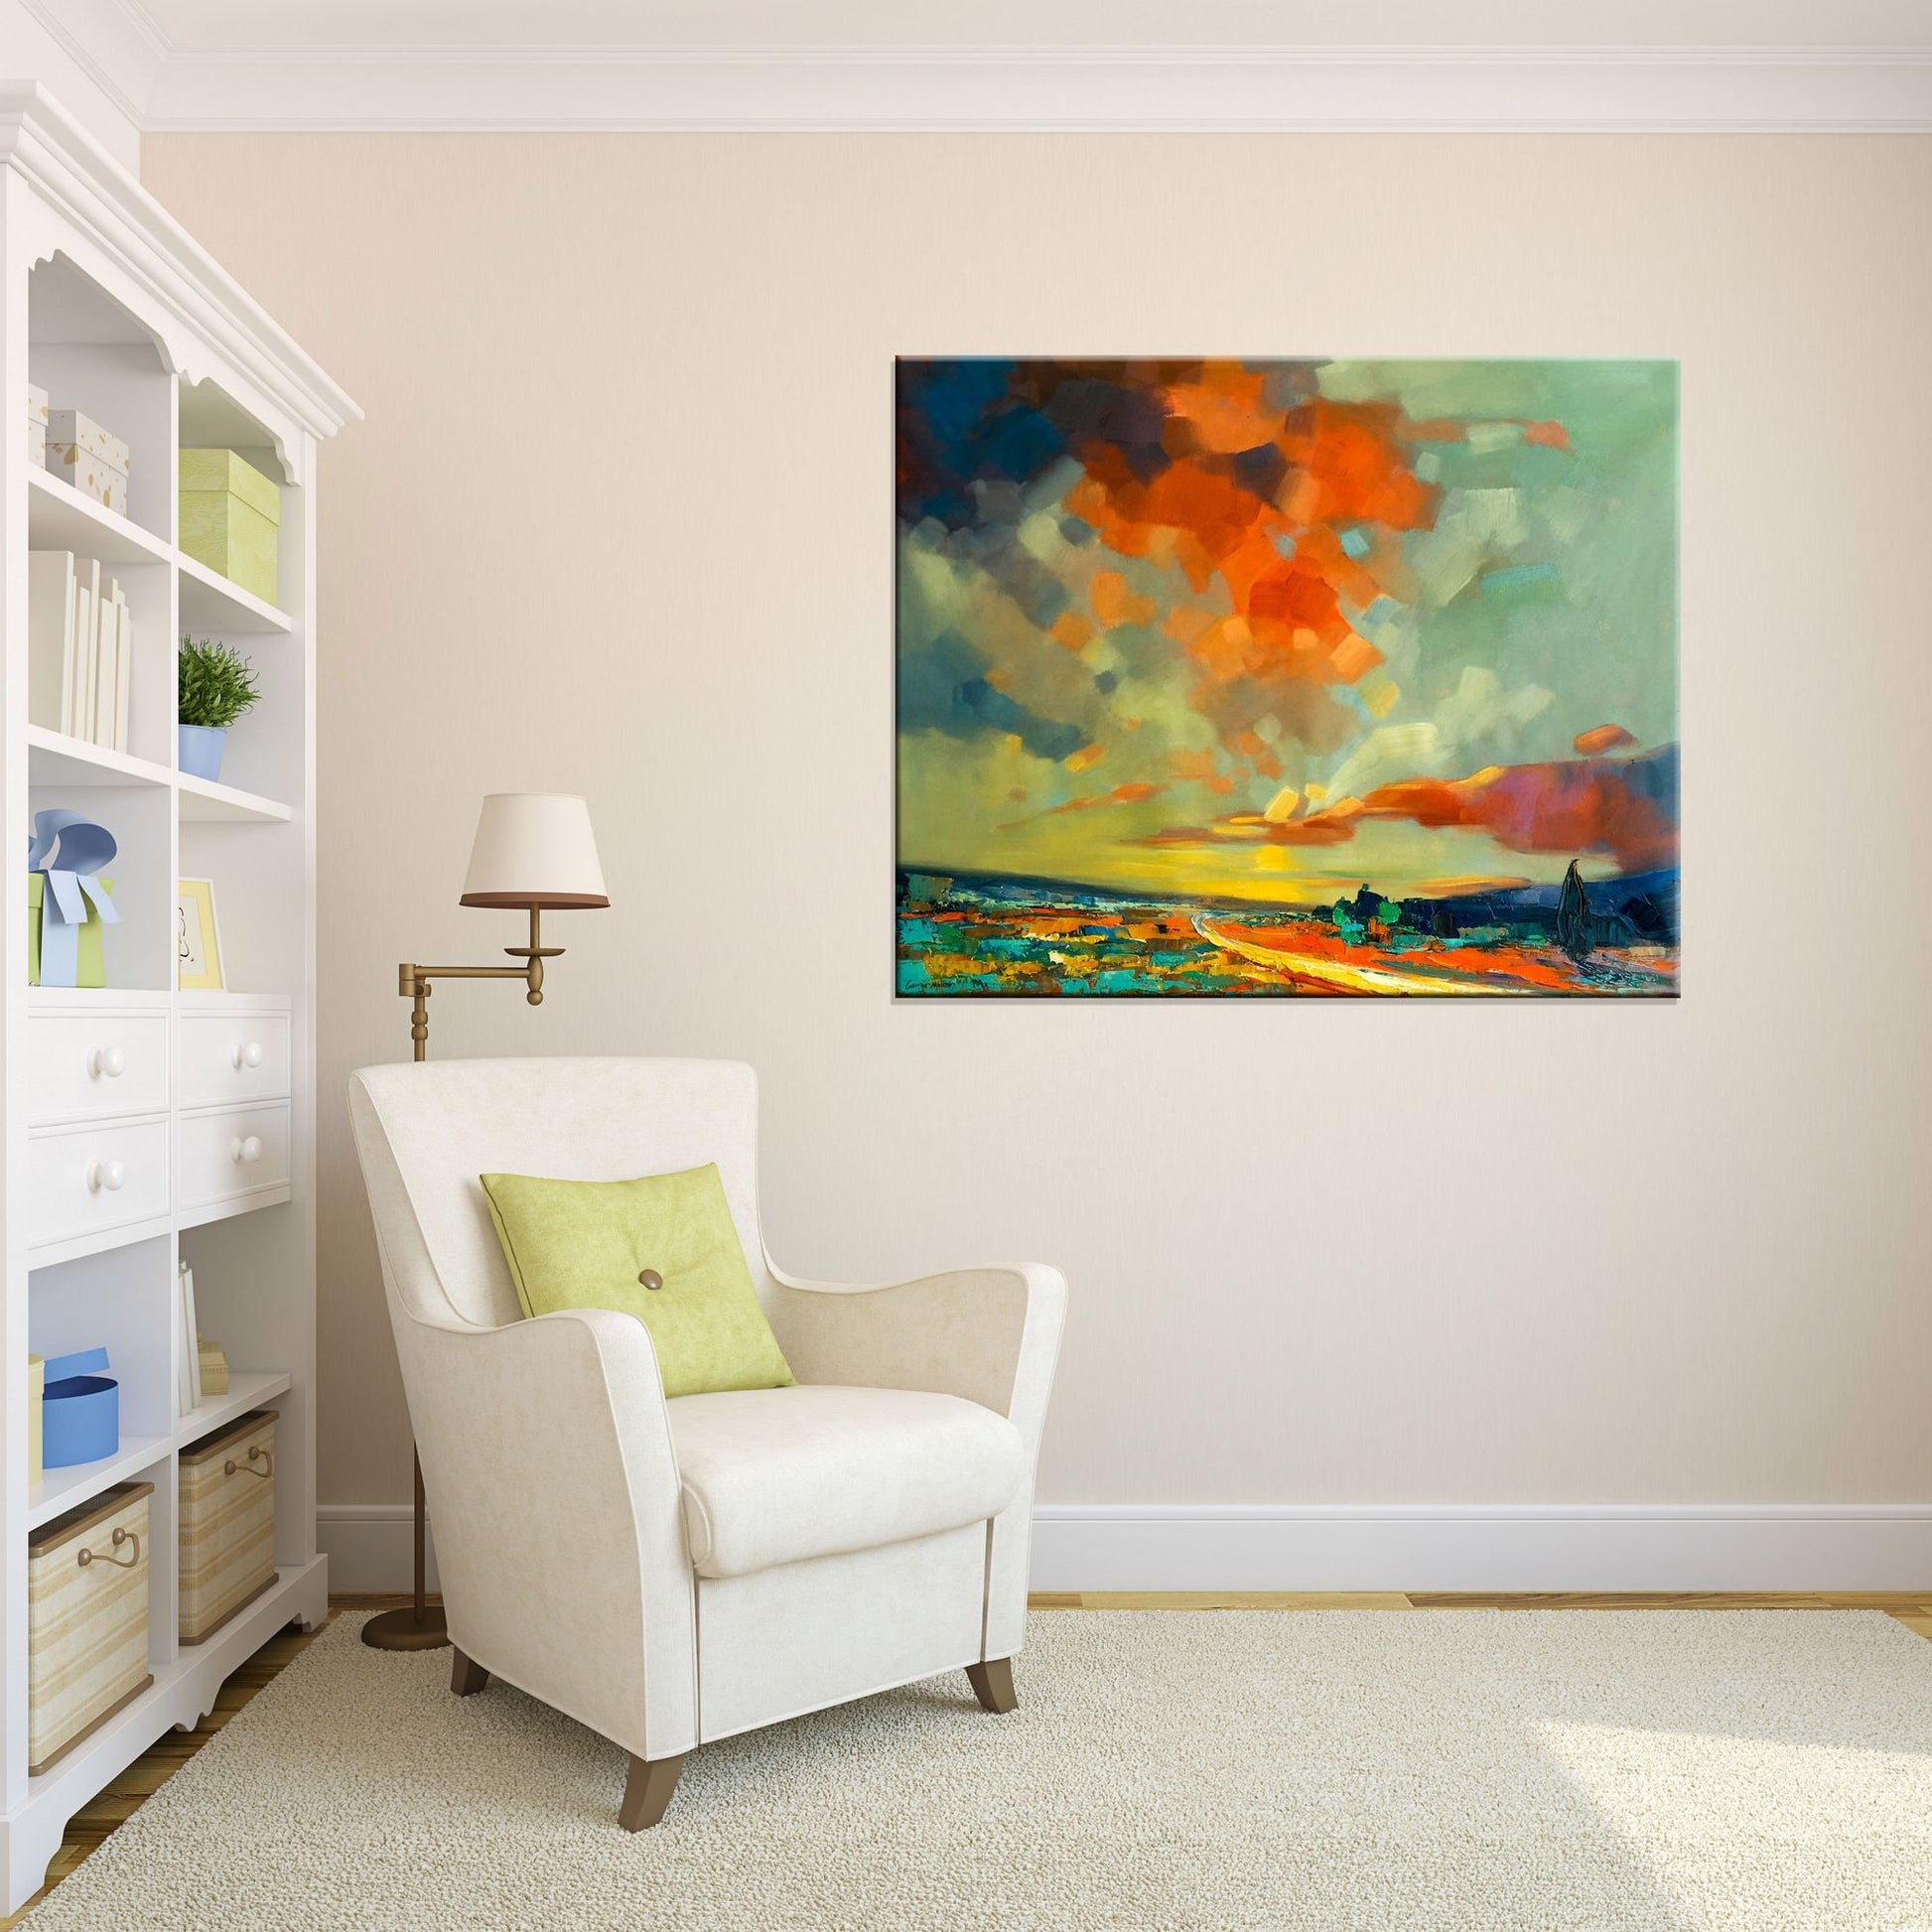 Large Abstract Landscape Oil Painting, Canvas Wall Art, Paintings On Canvas, Oversized Painting, Handmade, Impressionist Art, Impasto